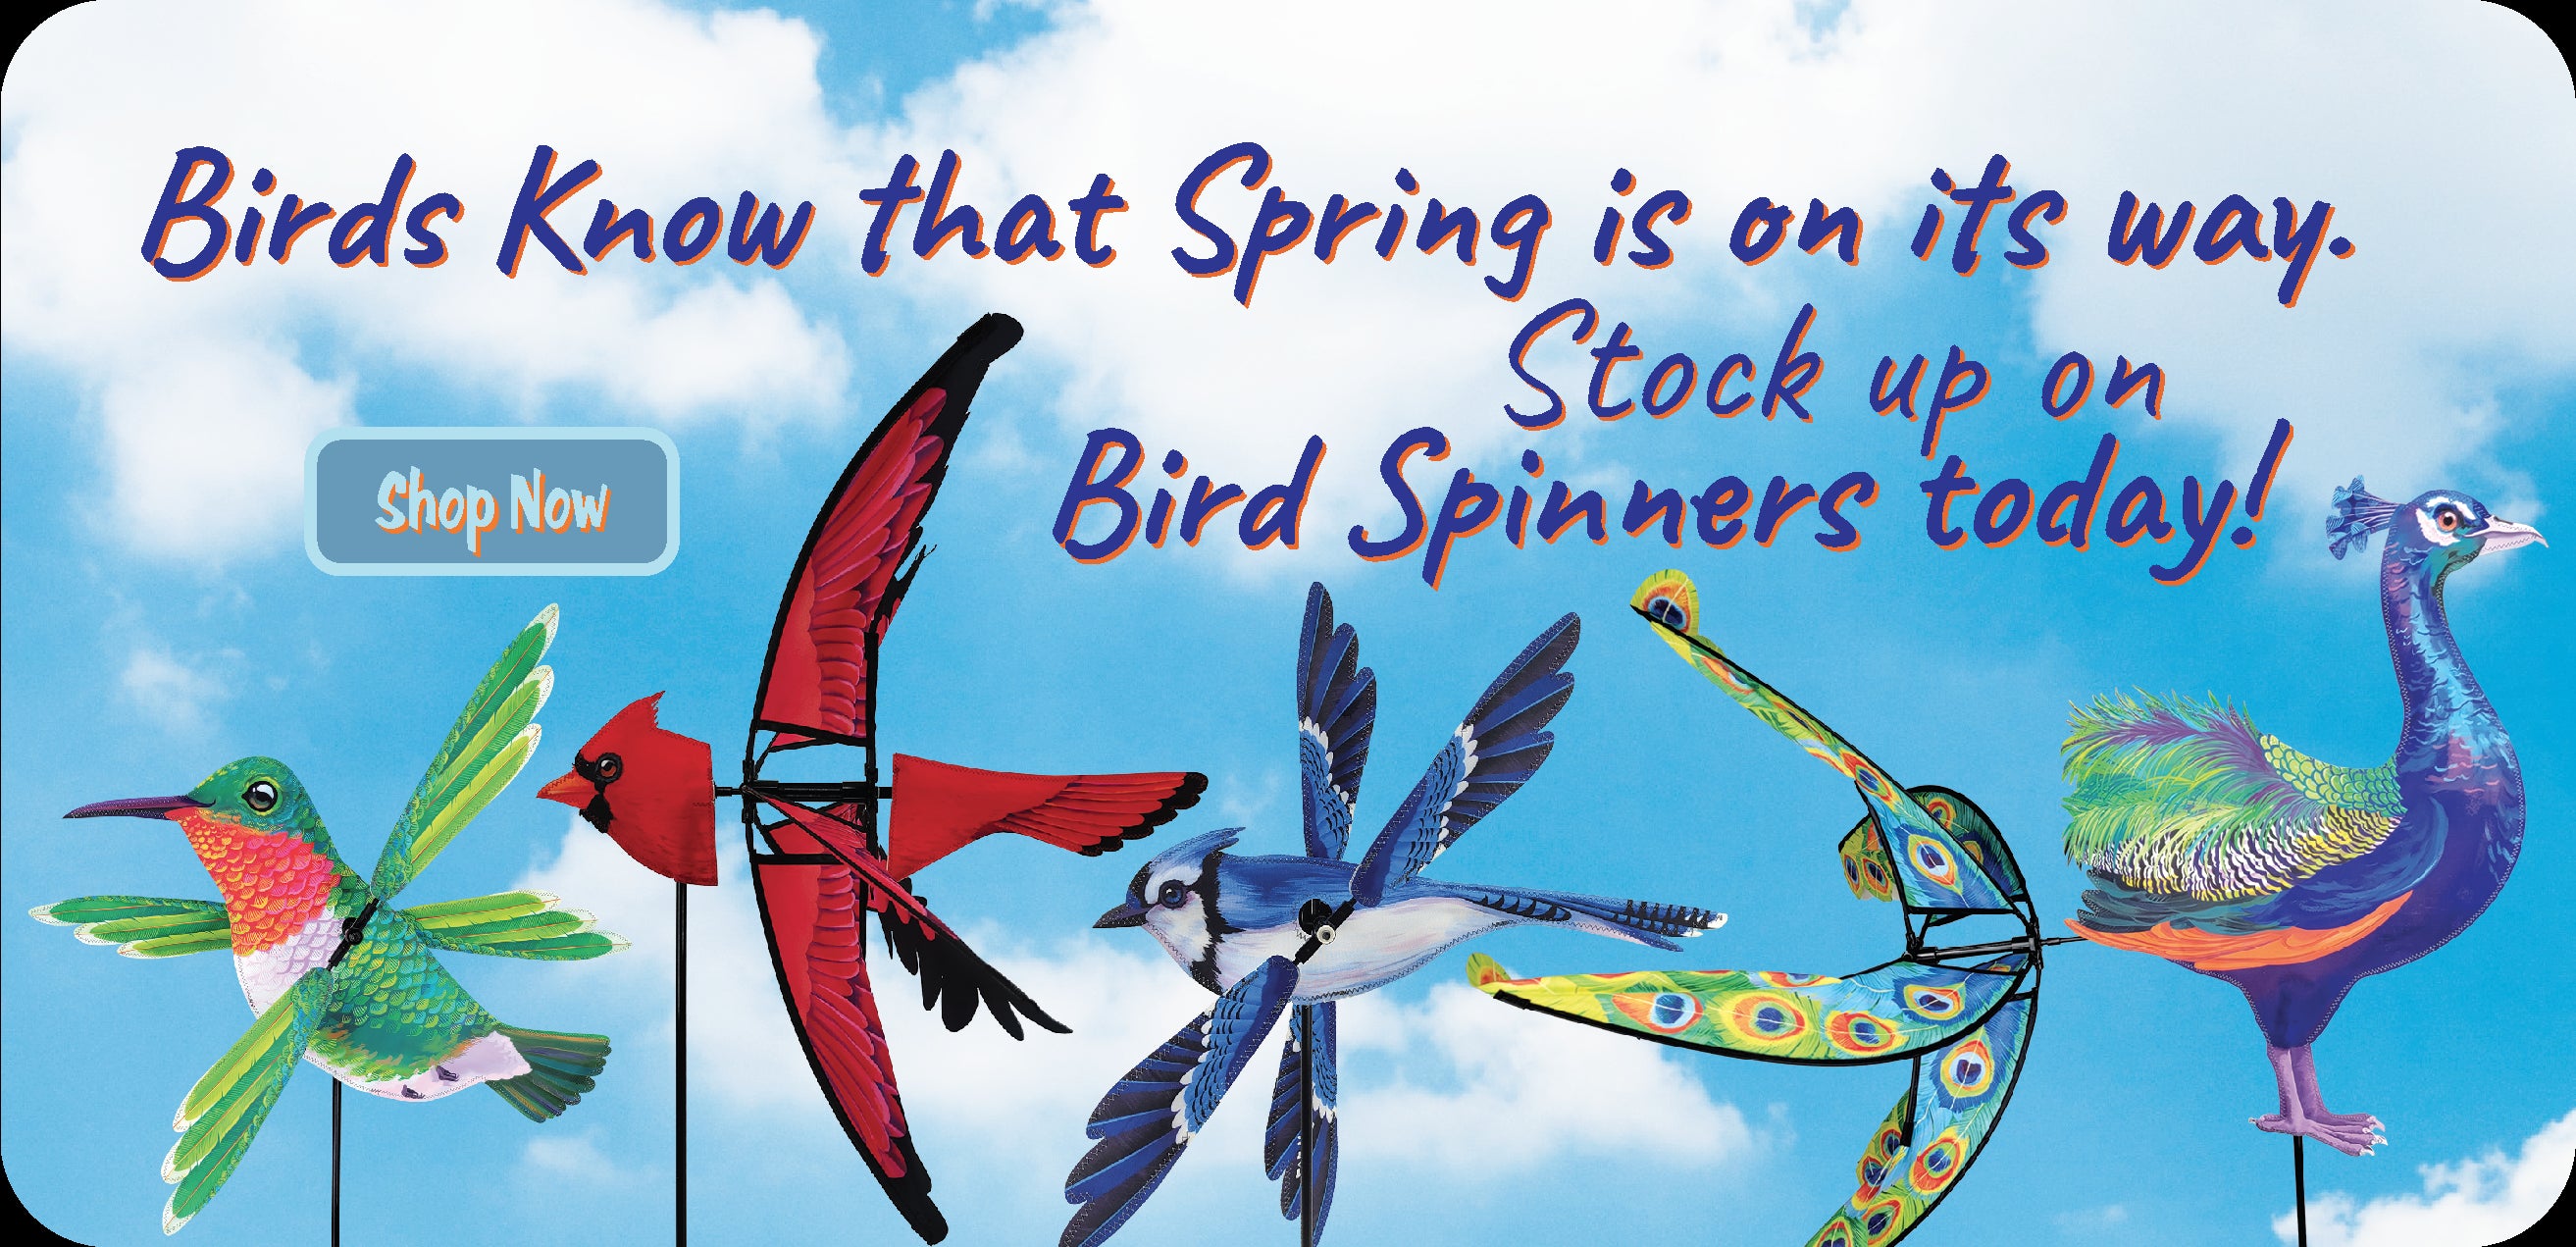 Birds know that Spring is on its way. Stock up on Bird Spinners today!